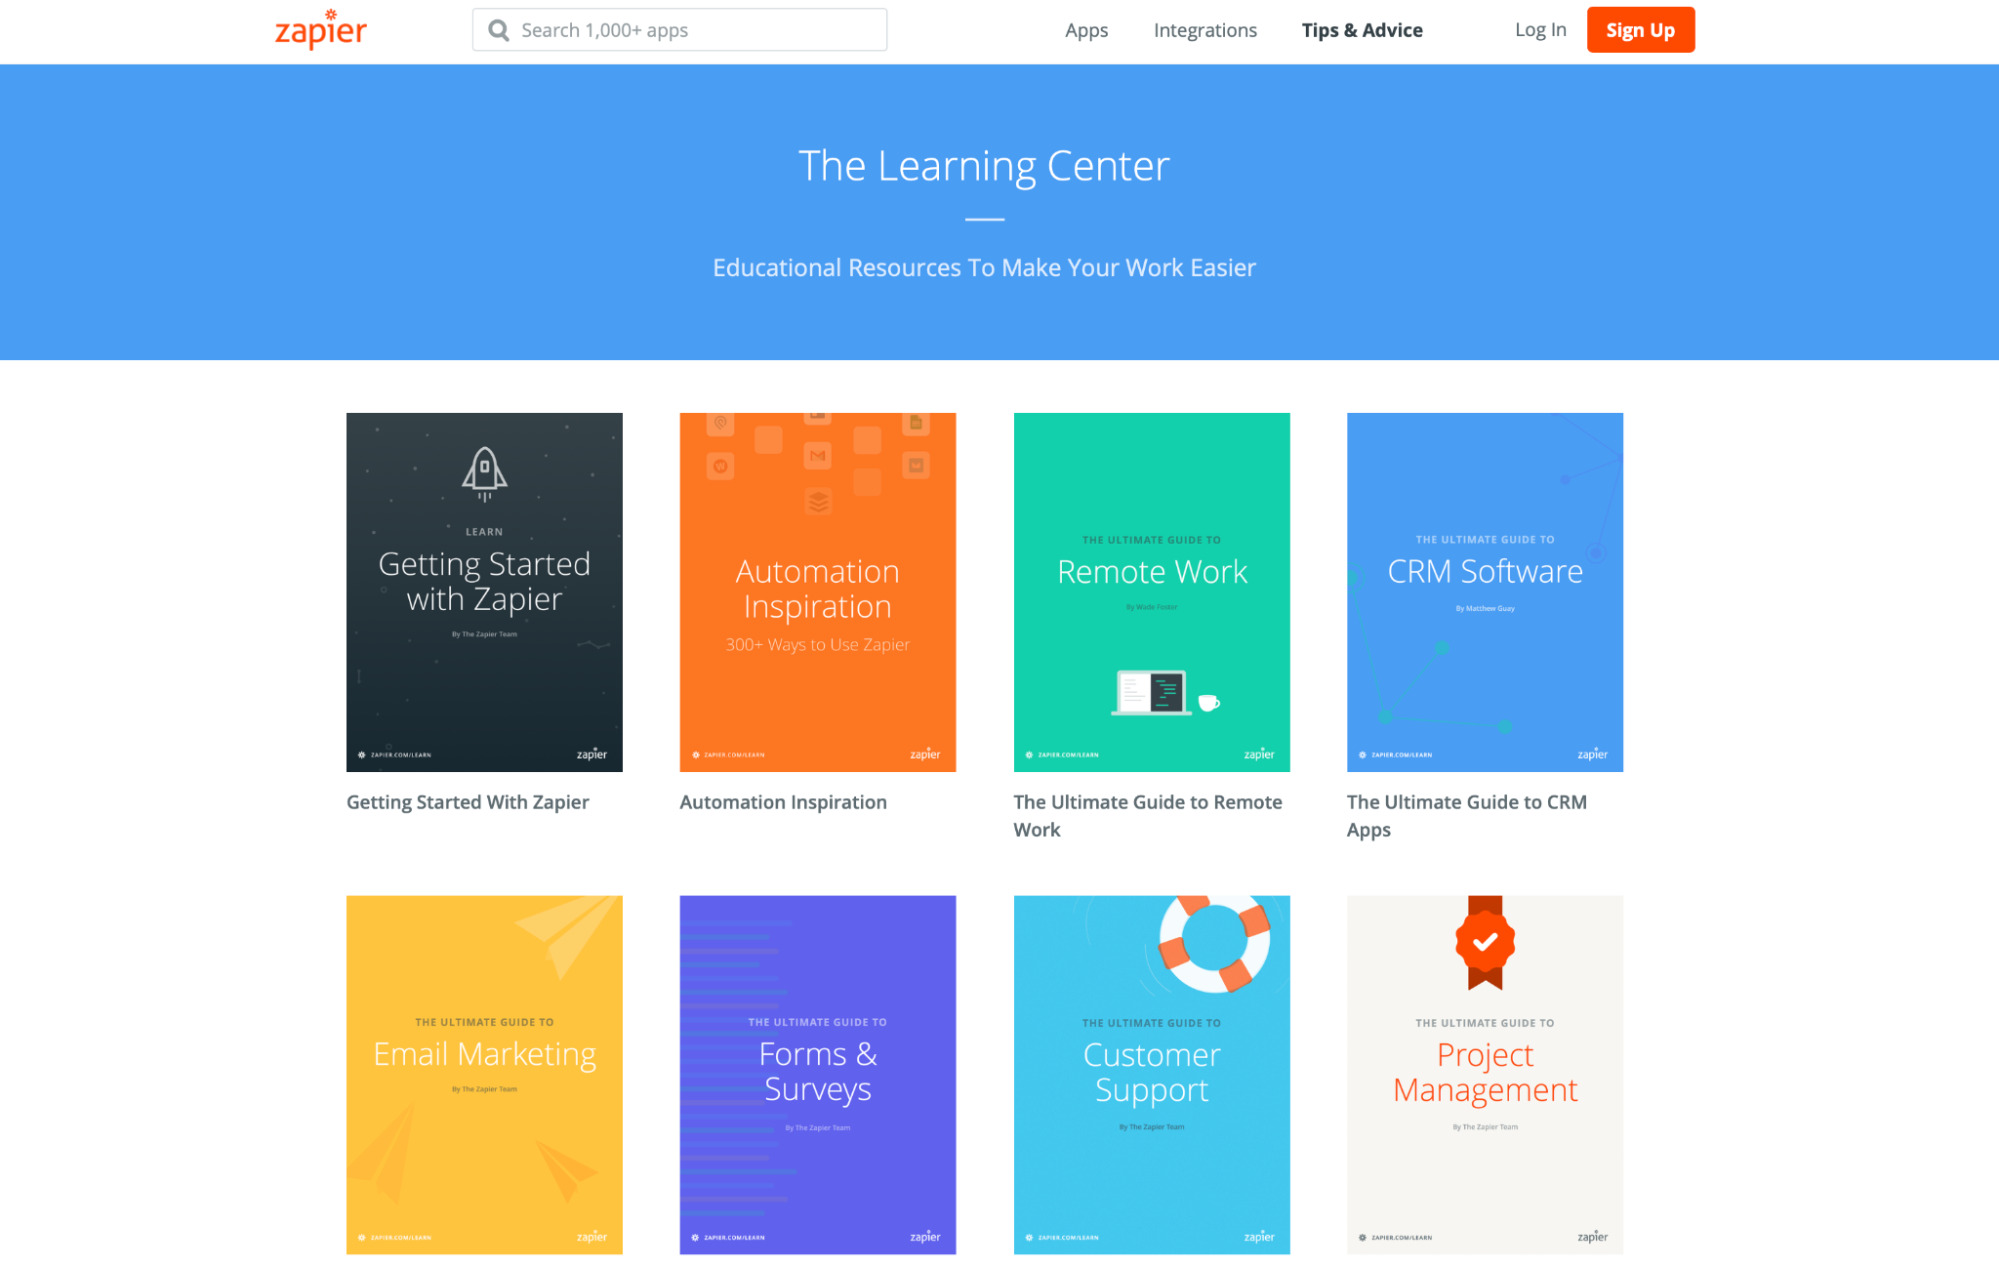 Zapier’s original learning center with software-focused ebooks (still in the Kindle store today) 